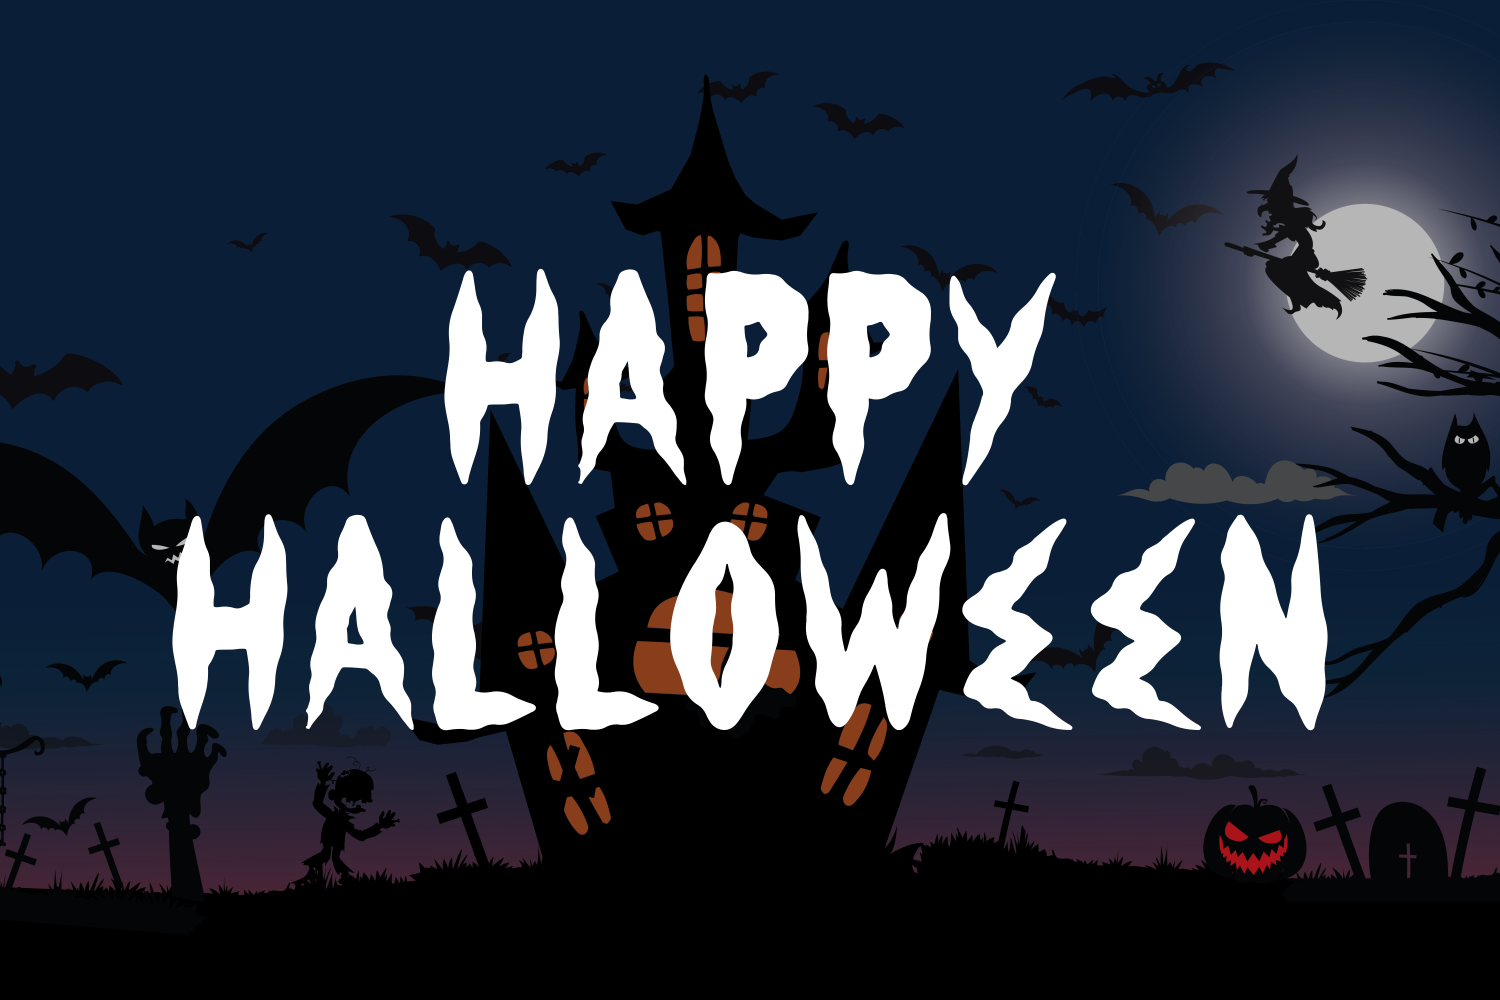 Horror Corpse Spooky Halloween Font By Forberas | TheHungryJPEG